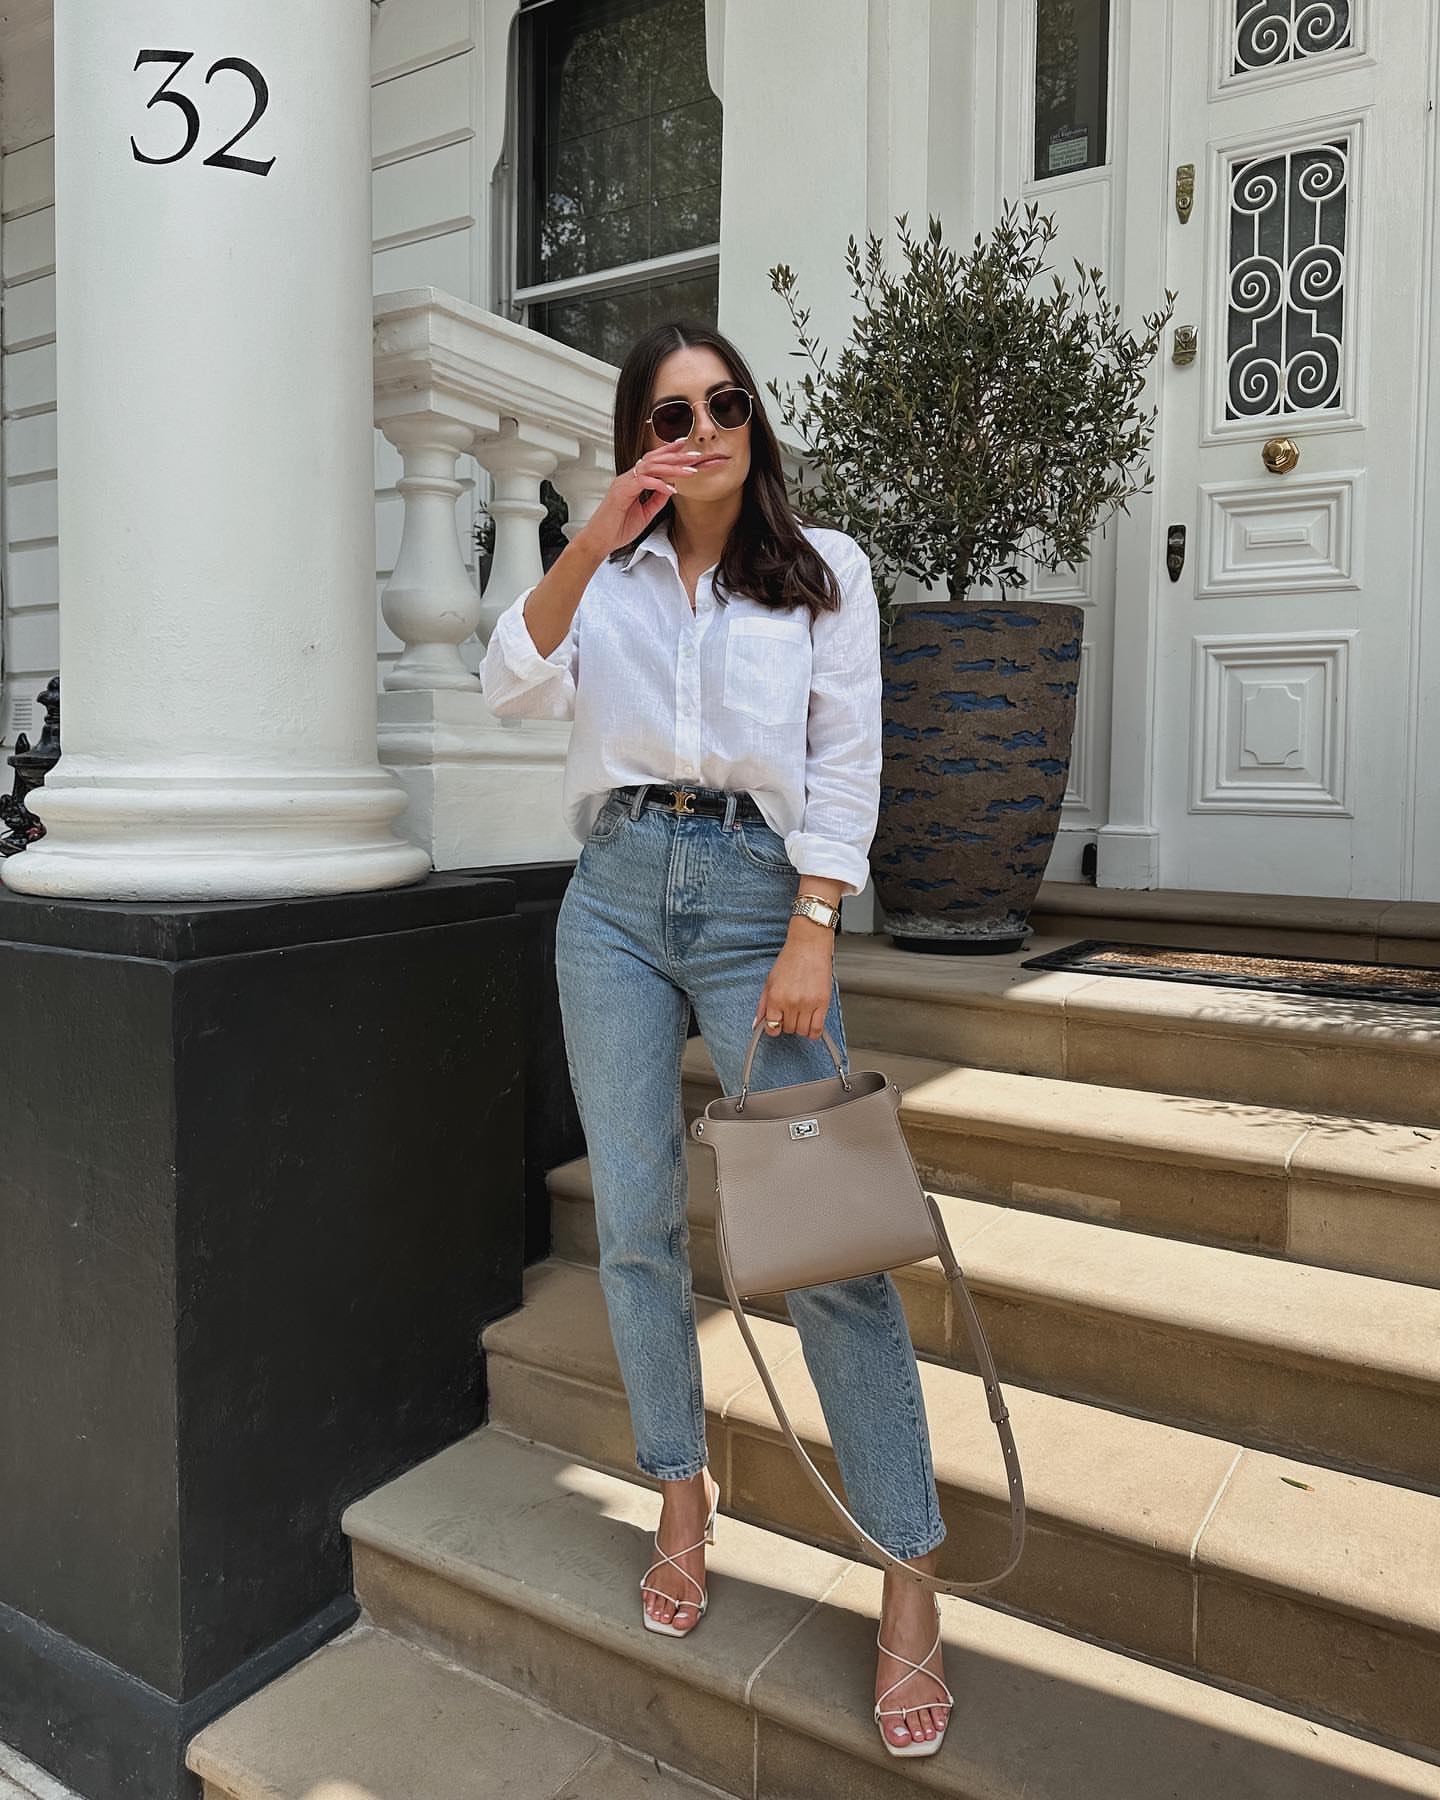 The Timeless Charm of Mom Jeans: Igniting Fashion Passion - Styles